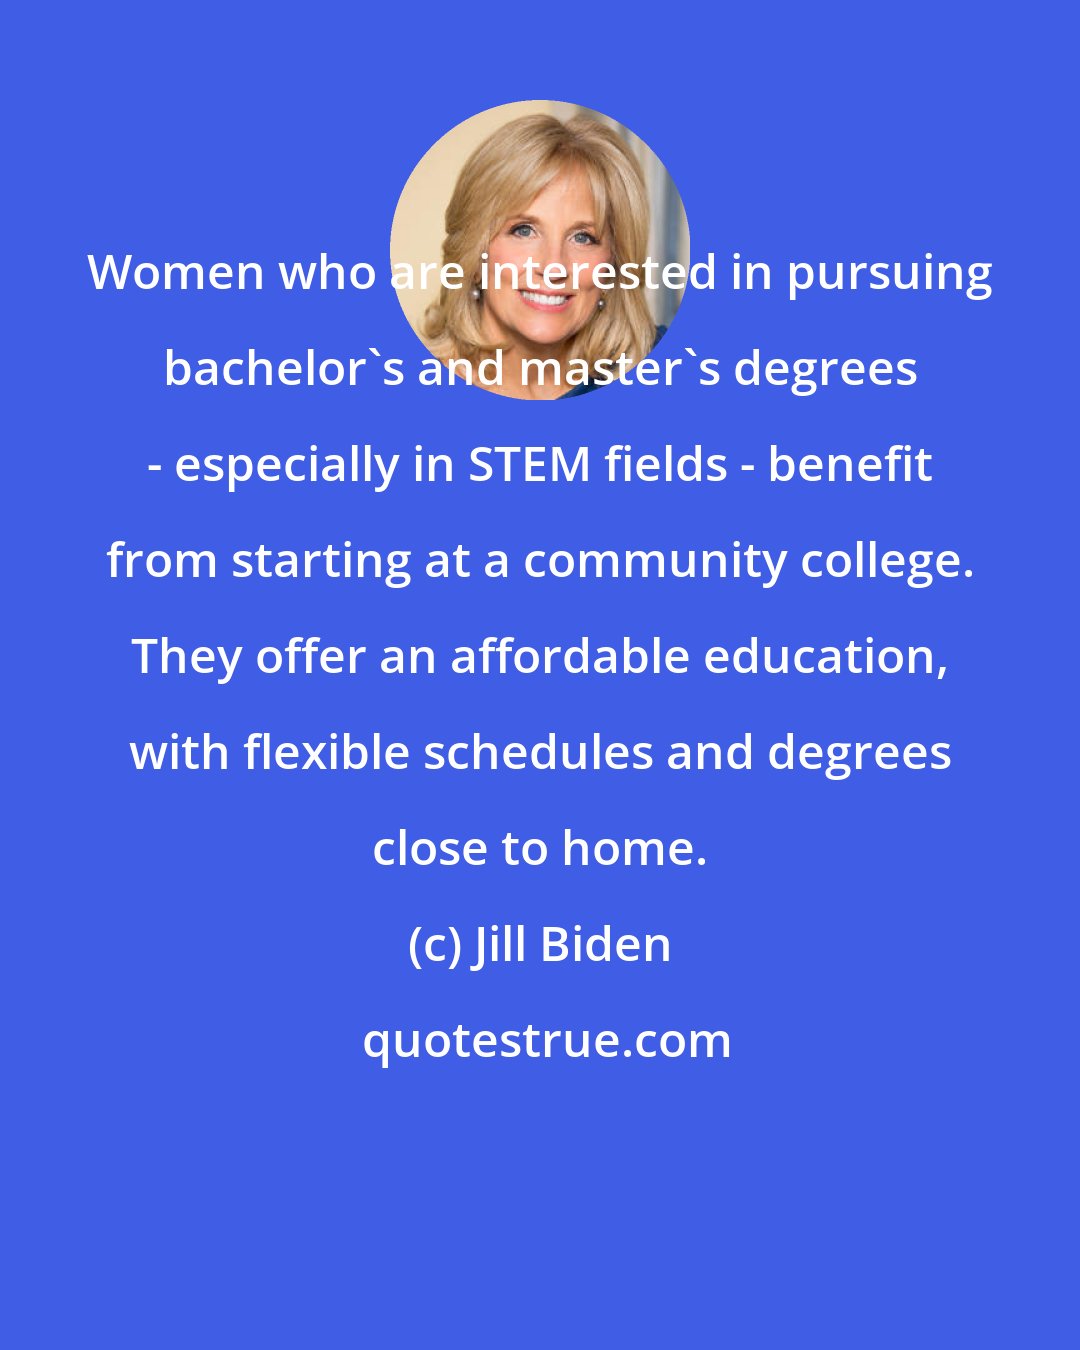 Jill Biden: Women who are interested in pursuing bachelor's and master's degrees - especially in STEM fields - benefit from starting at a community college. They offer an affordable education, with flexible schedules and degrees close to home.